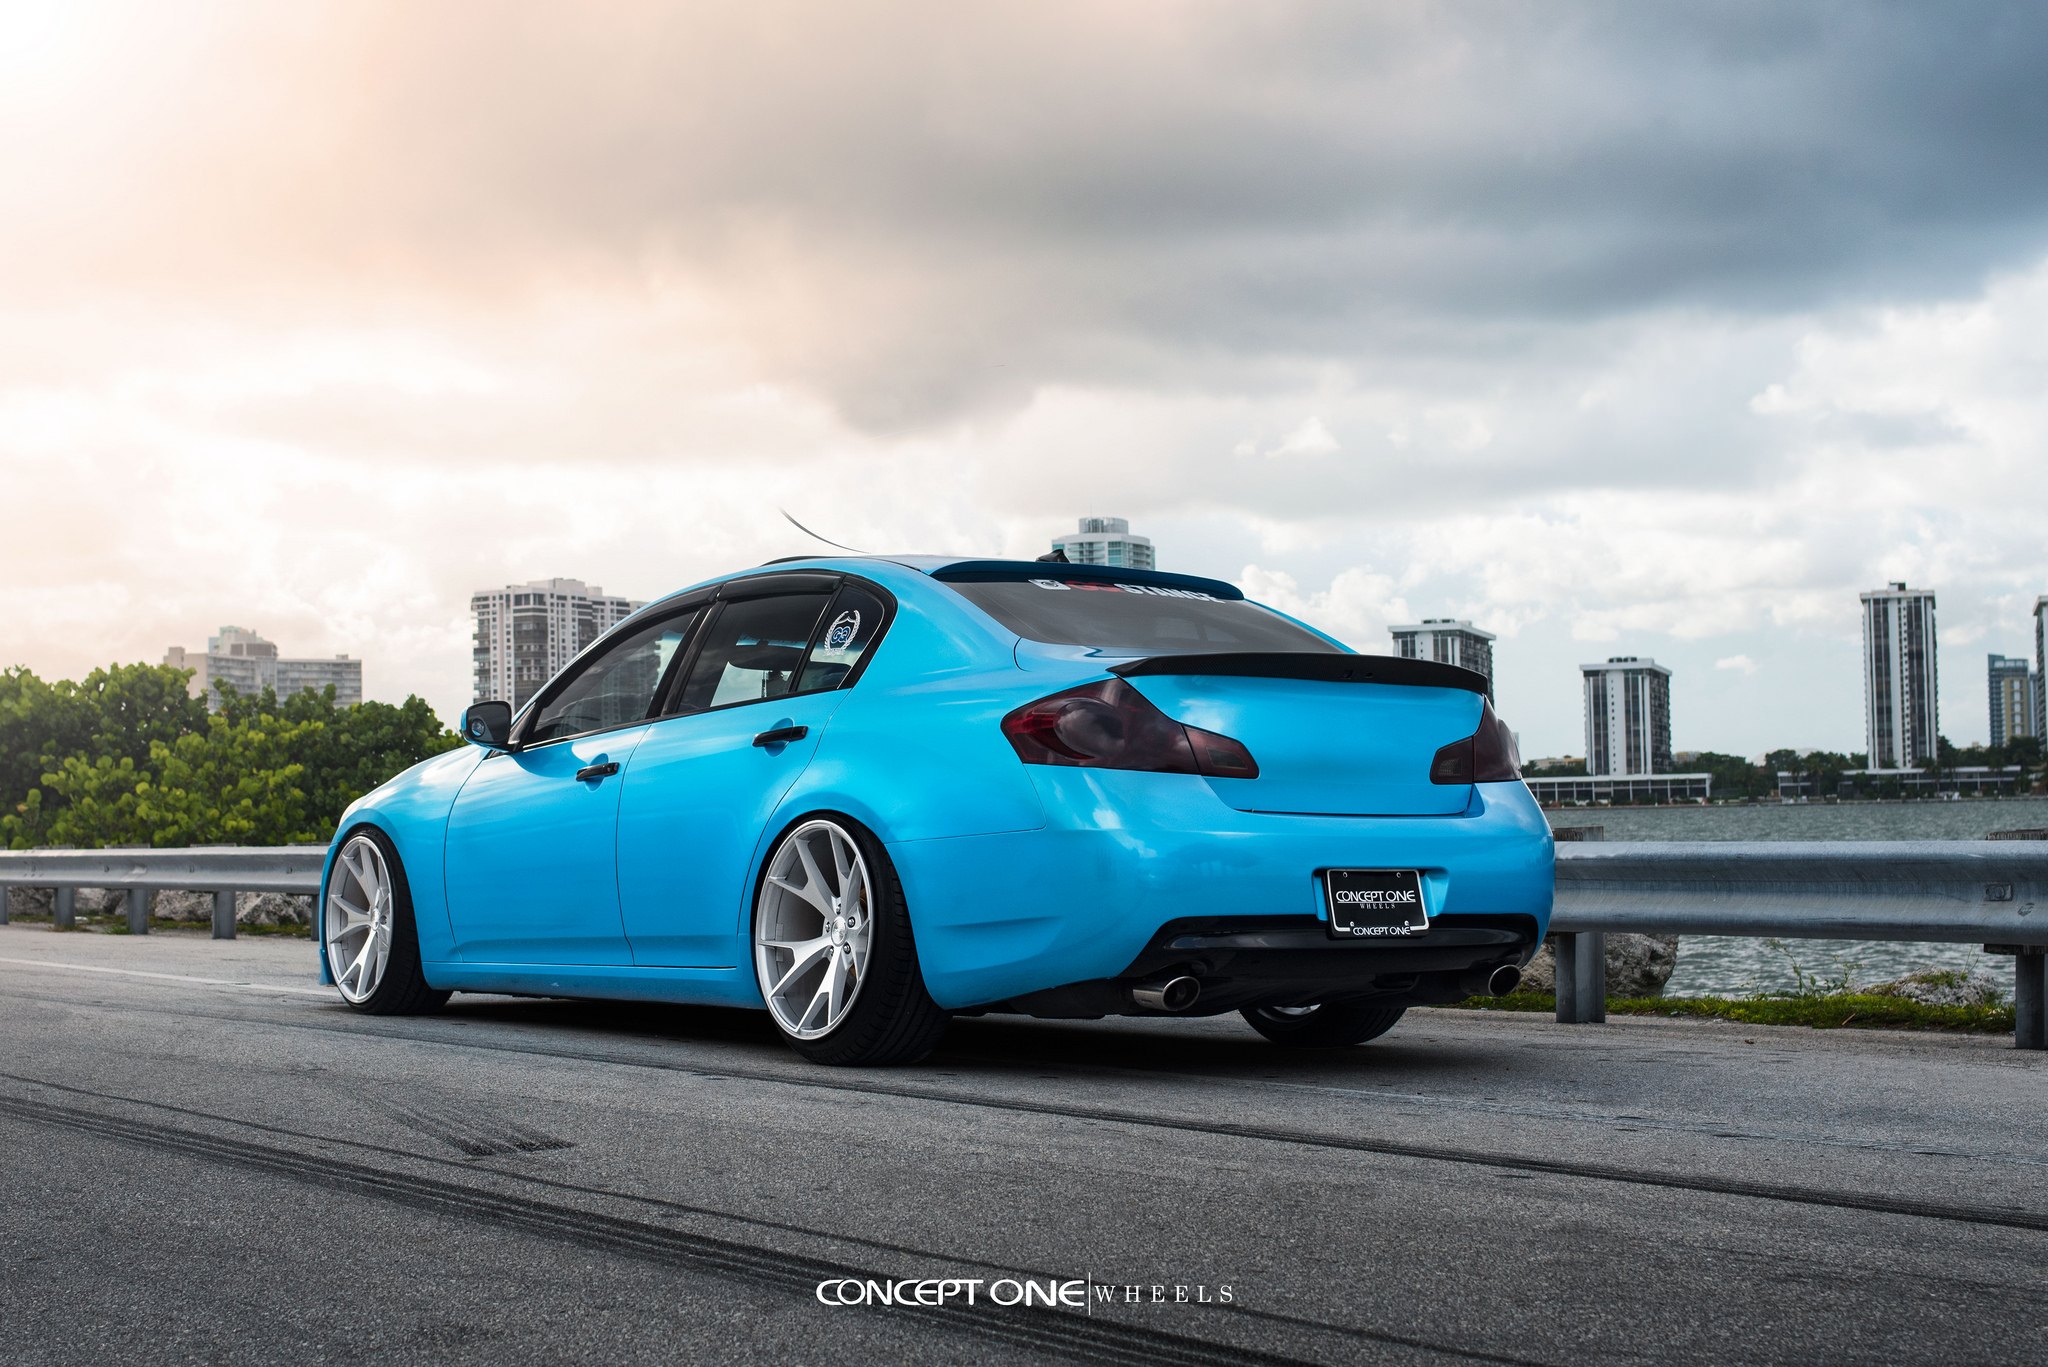 Chrome Concept One Wheels on Blue Infiniti G35 - Photo by Concept One